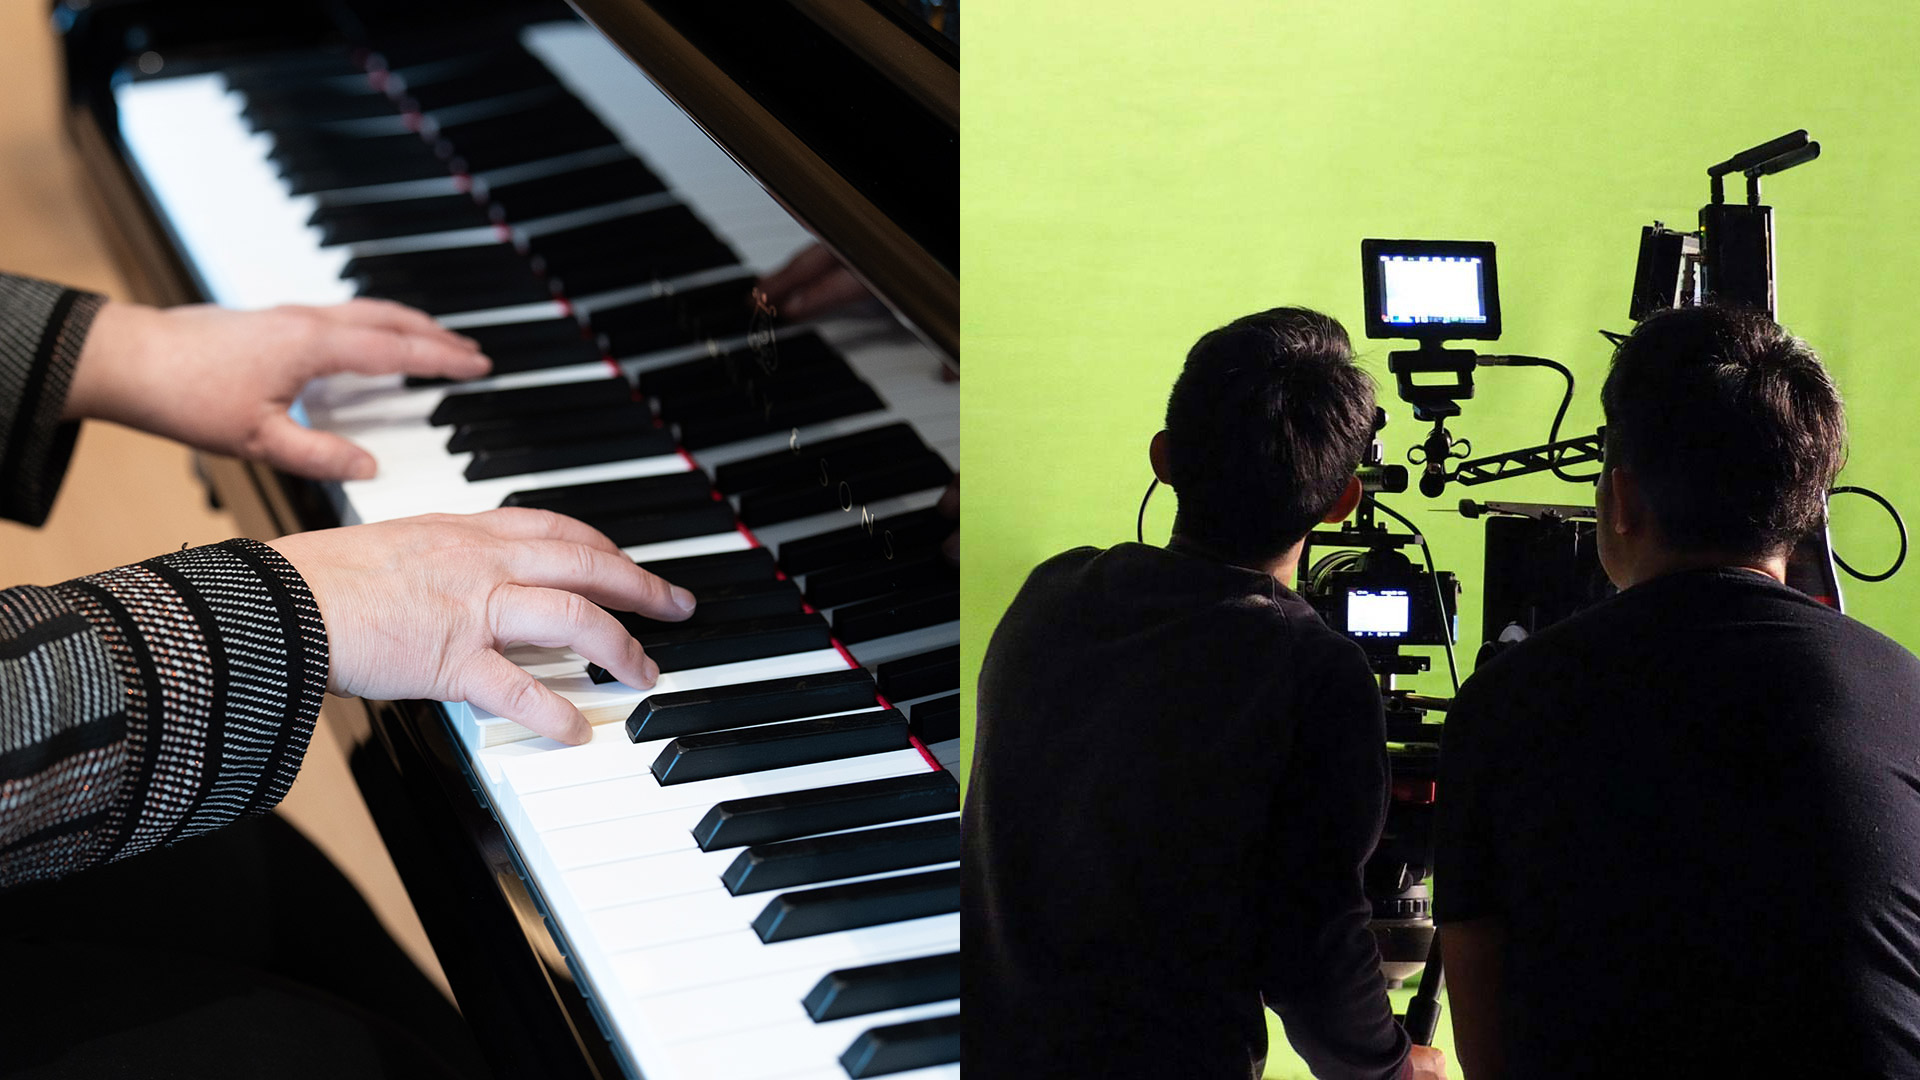 On the left, hands on a piano keyboard, and on the right, two students handle film equipment